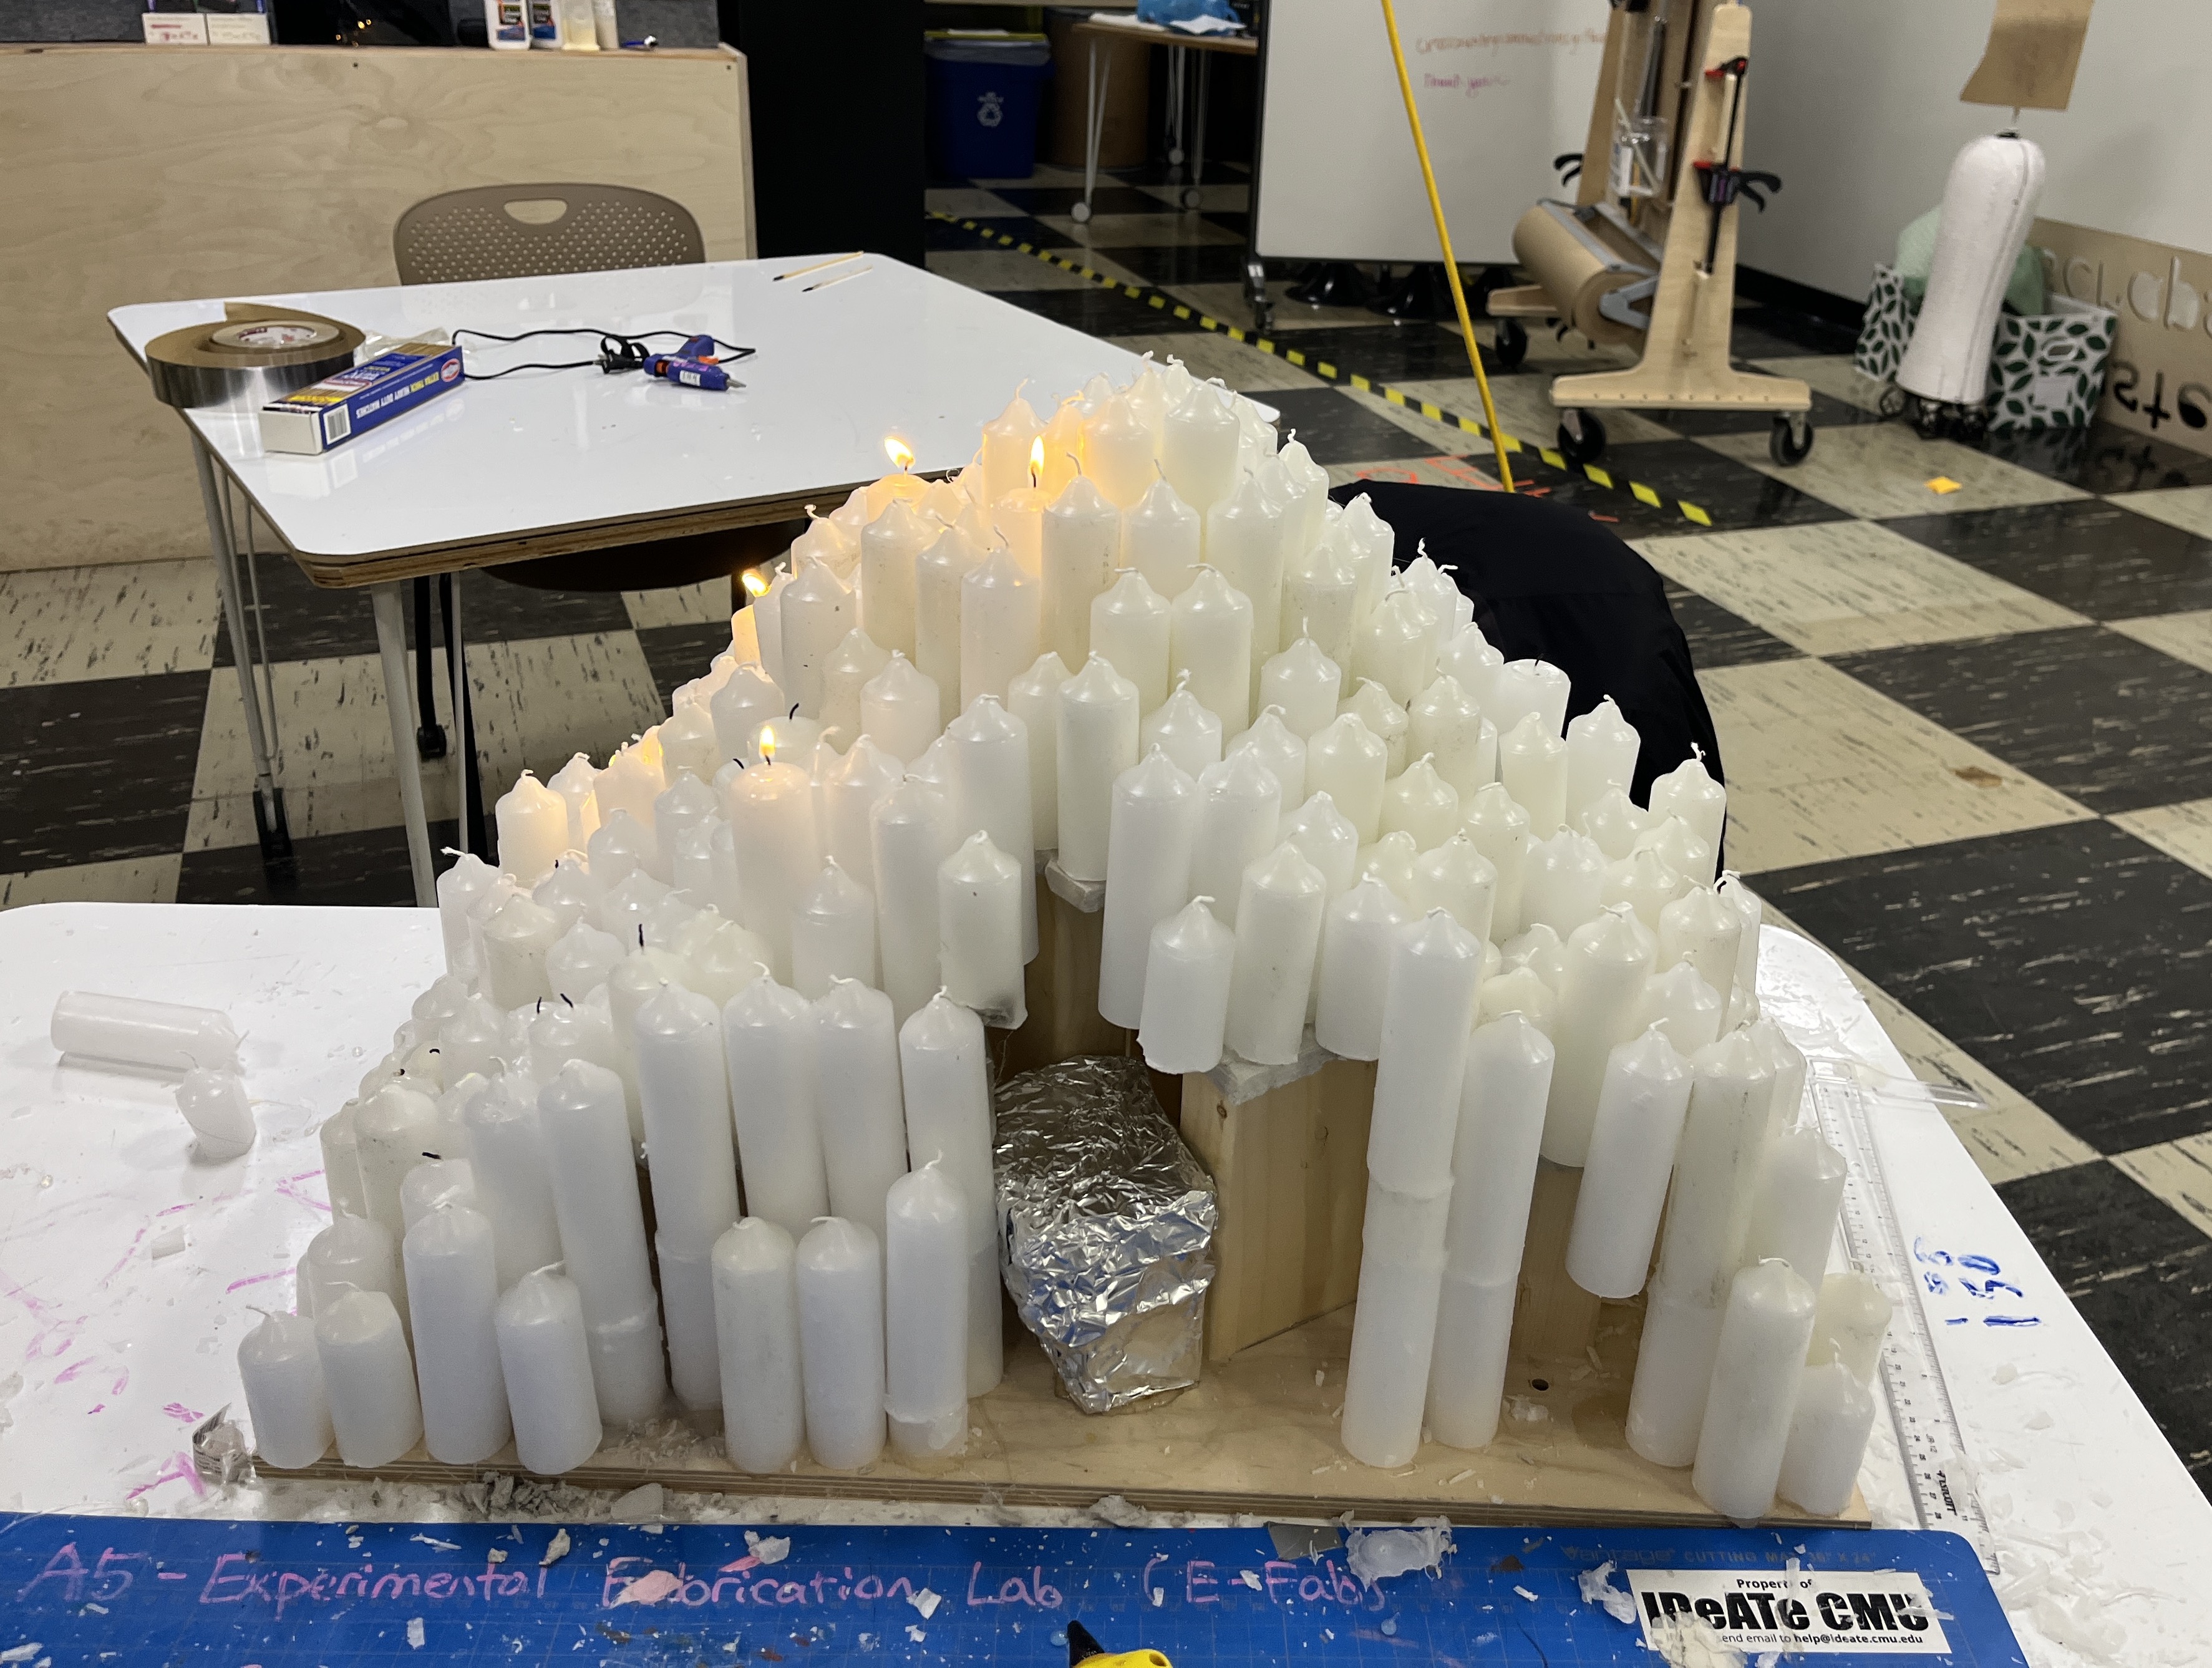 Post-cut candles, with some big ones in front. We've glued a few to be floating, and the insides are still visible.